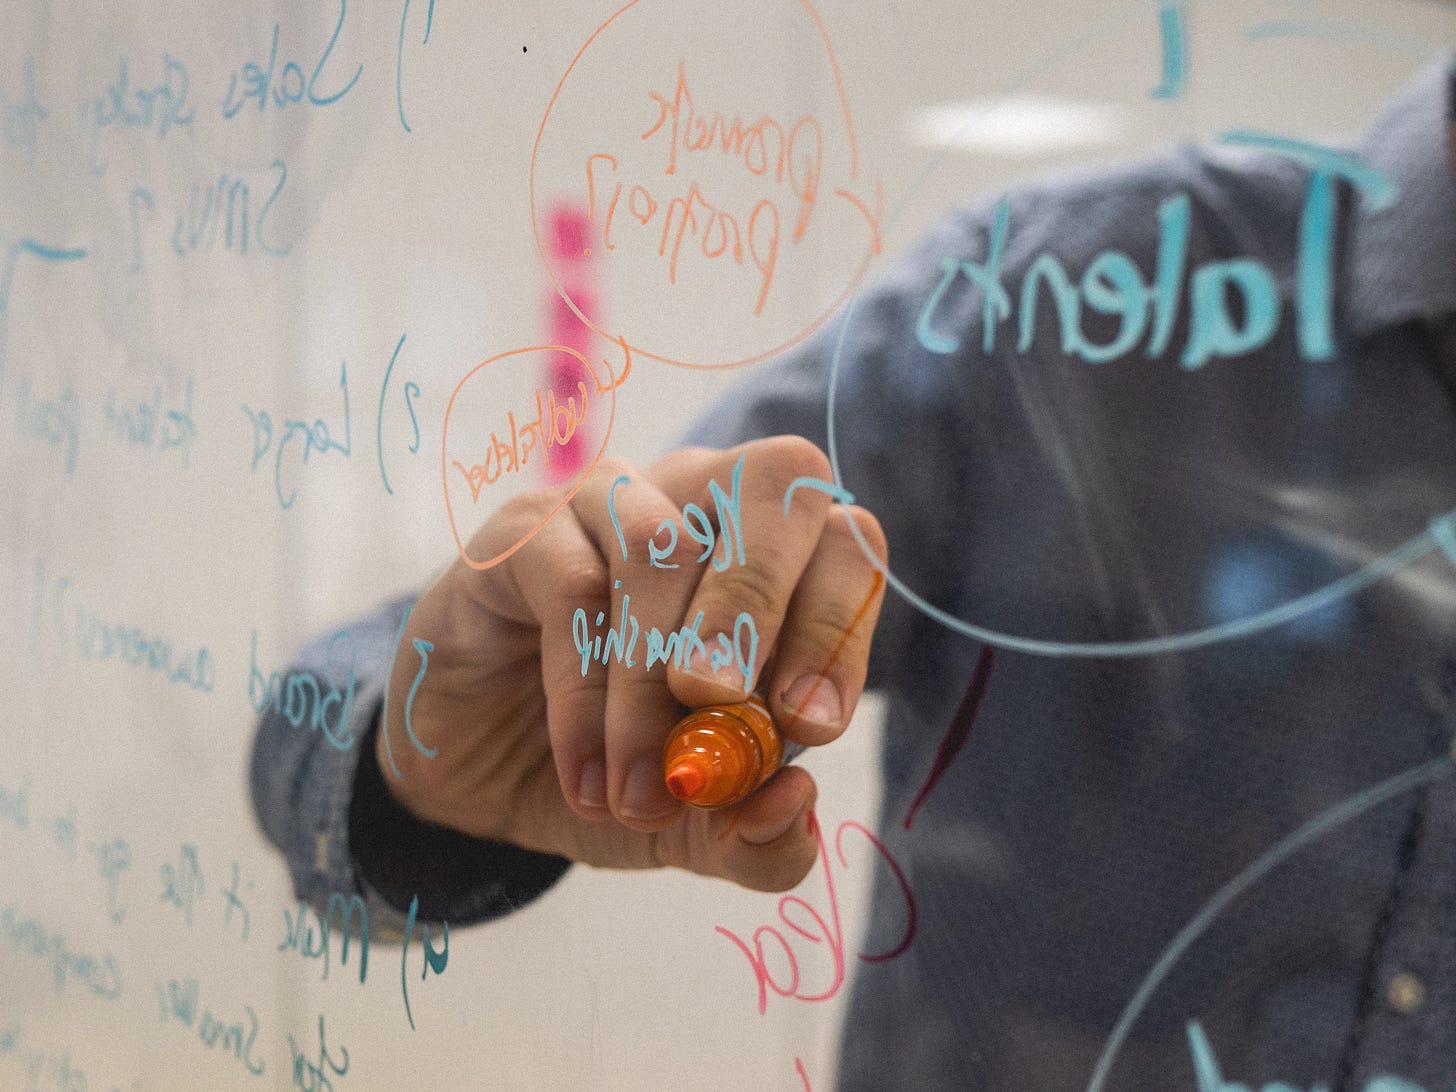 A photo taken through a transparent whiteboard covered in scrawled notes. A person stands on the other side, holding an orange marker up to the board. Only their hand, arm, and blue collared shirt is visible.